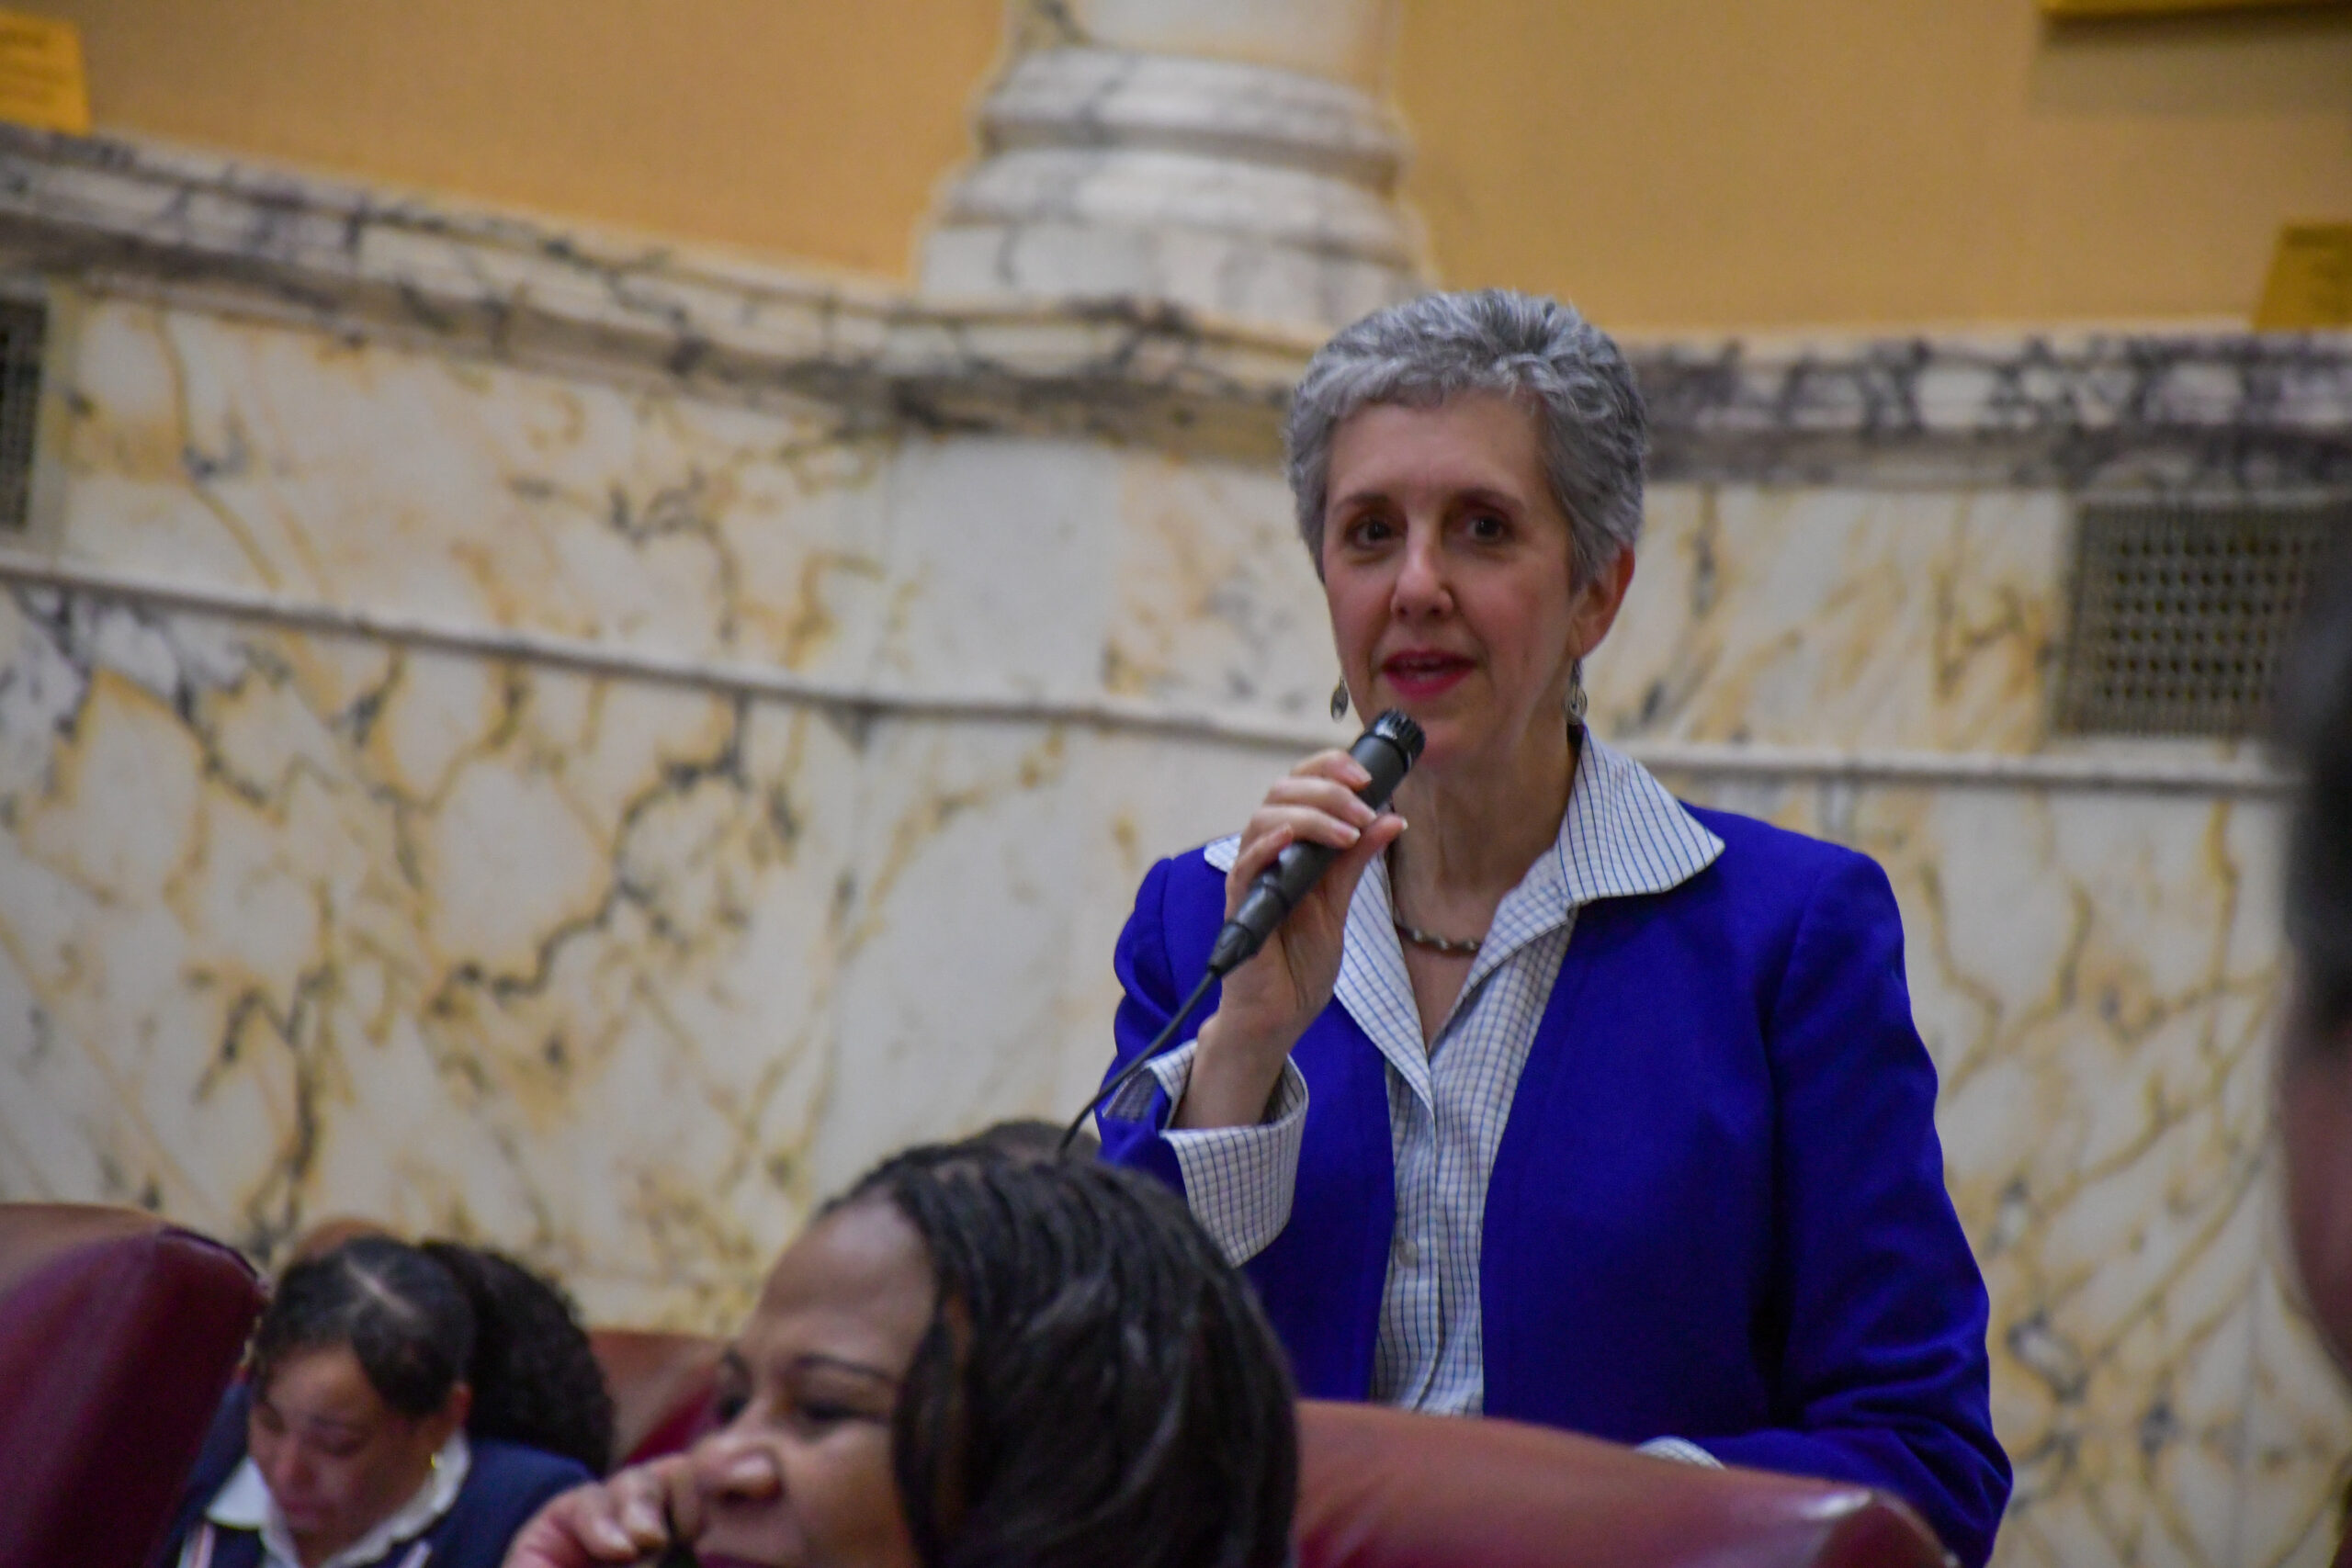 Sen. Cheryl Kagan, D-Montgomery, answers questions from Senate Minority Whip Justin Ready, R-Frederick and Carroll, about a paint stewardship bill. (Christine Zhu/Capital News Service)